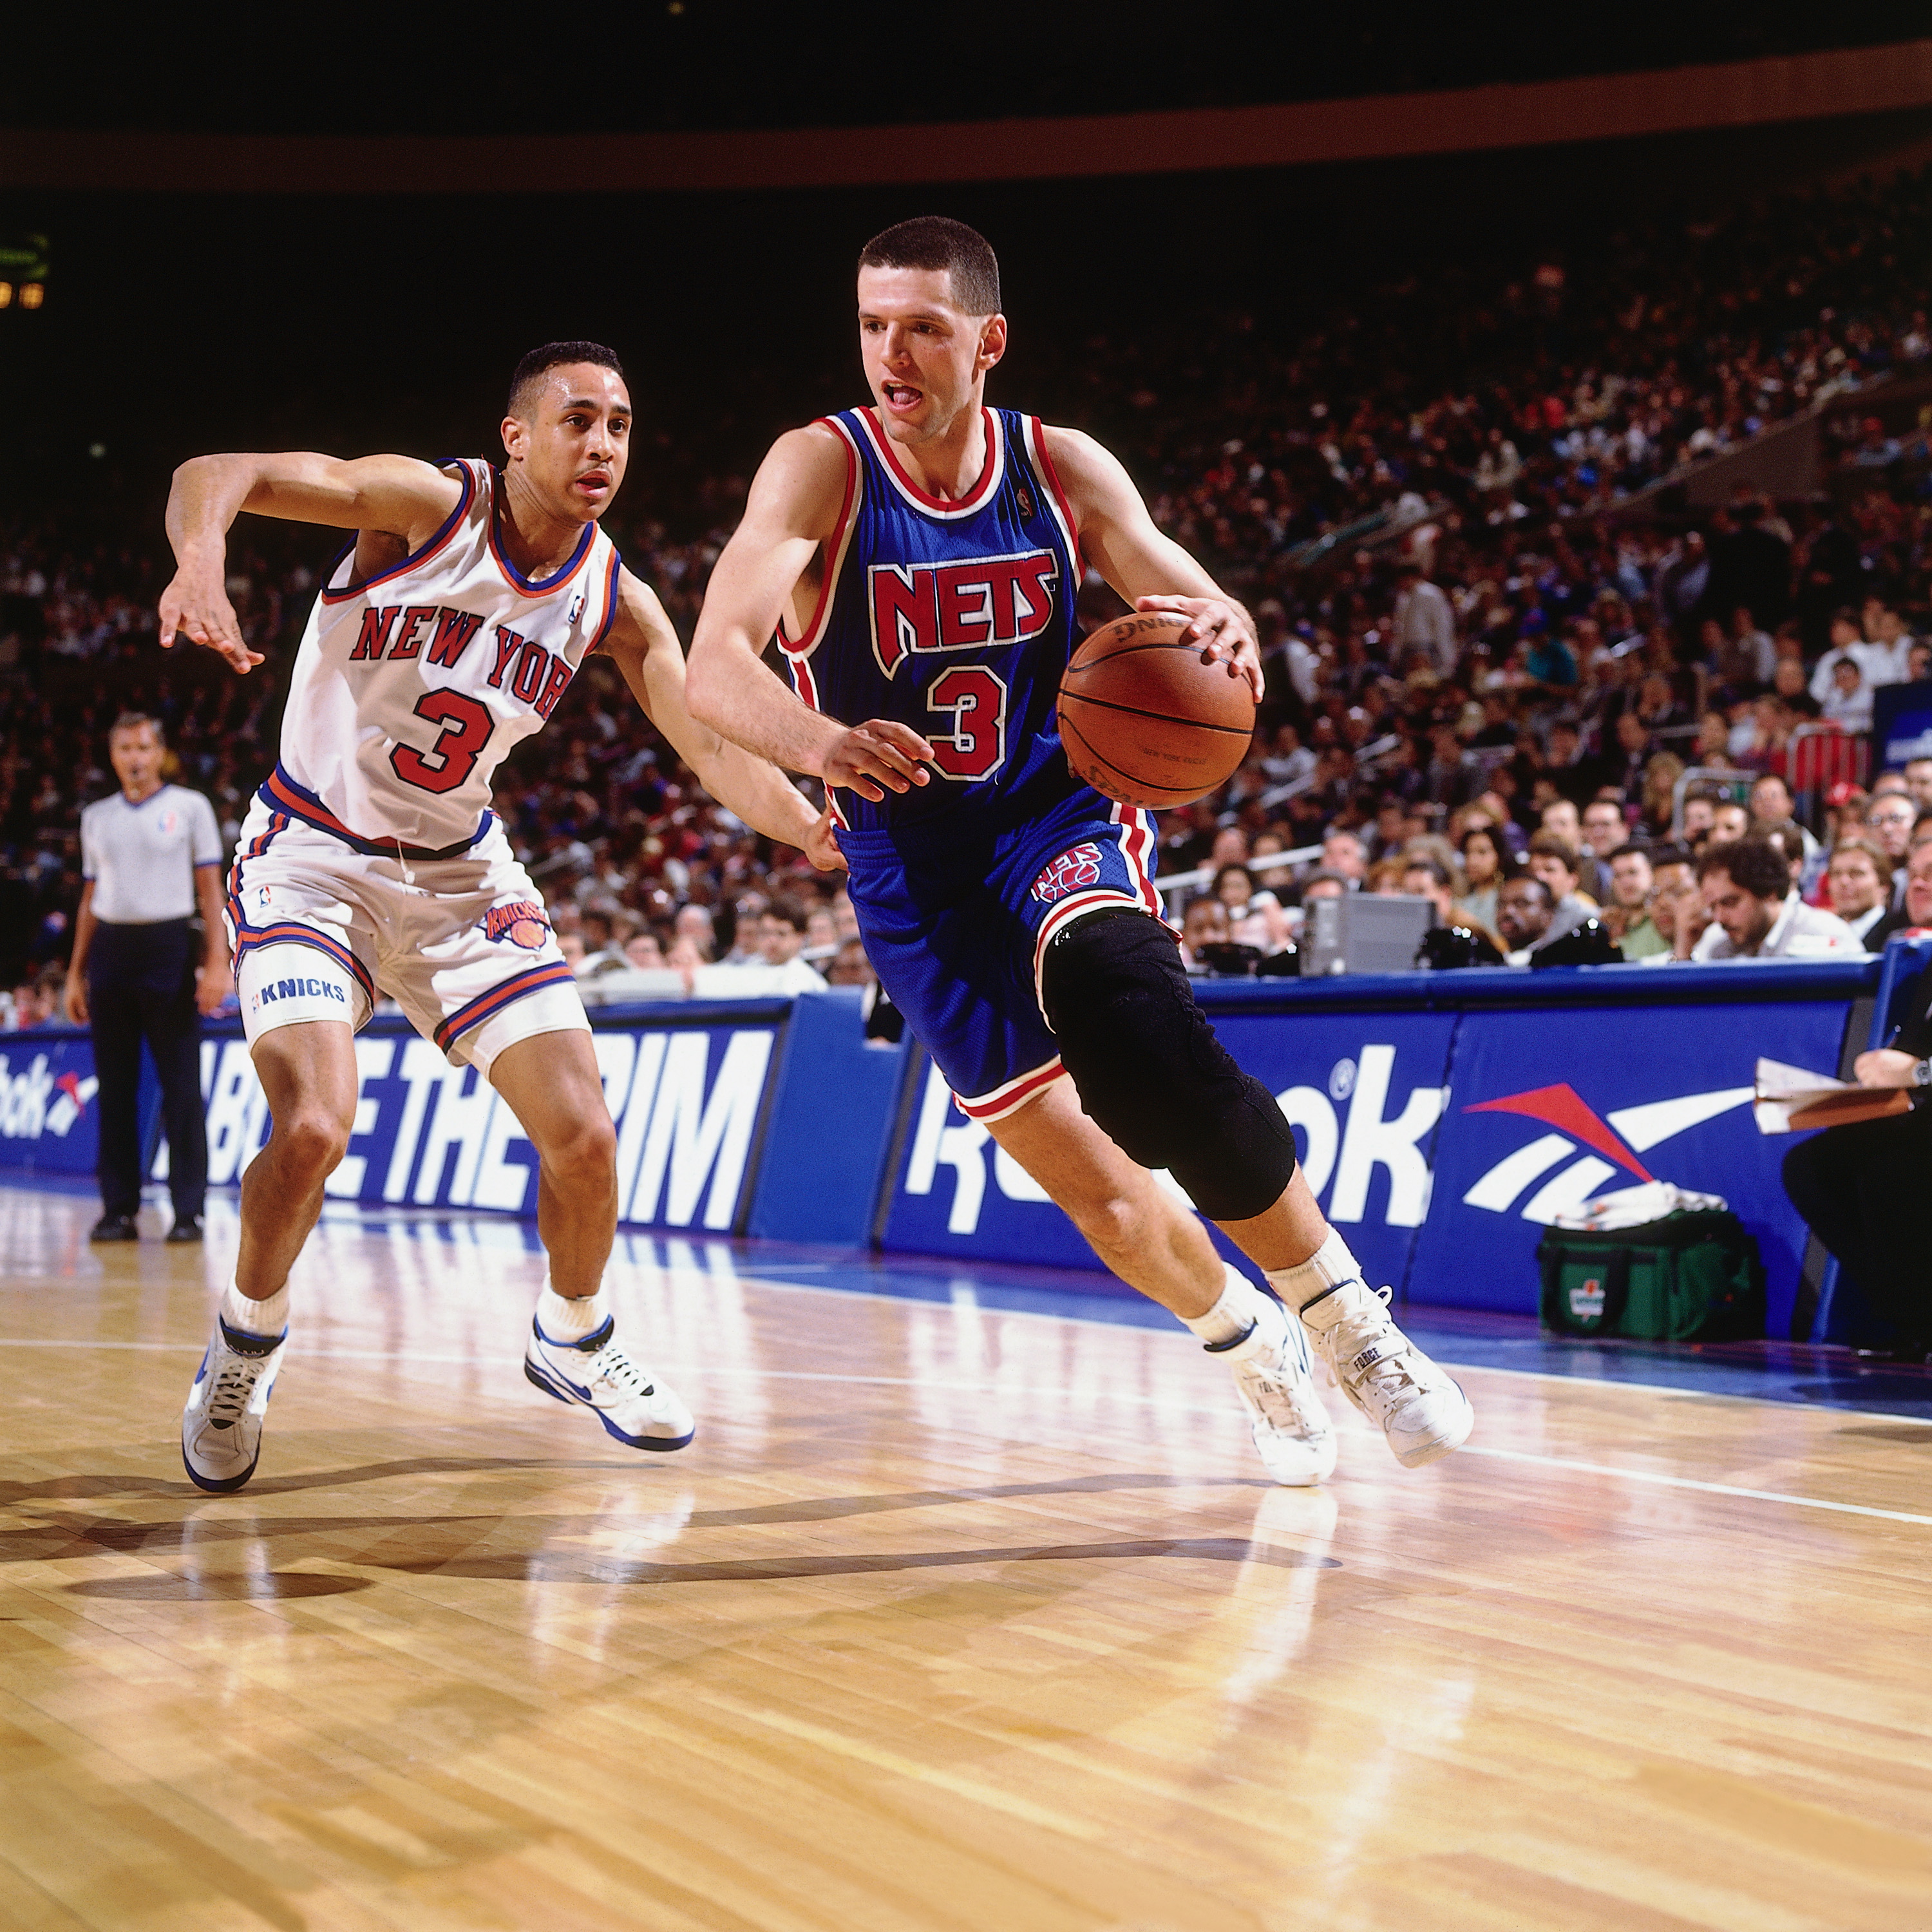 Brooklyn Nets - Drazen Petrovic would have turned 54 today. Happy birthday  to a Hall of Famer and forever legend.